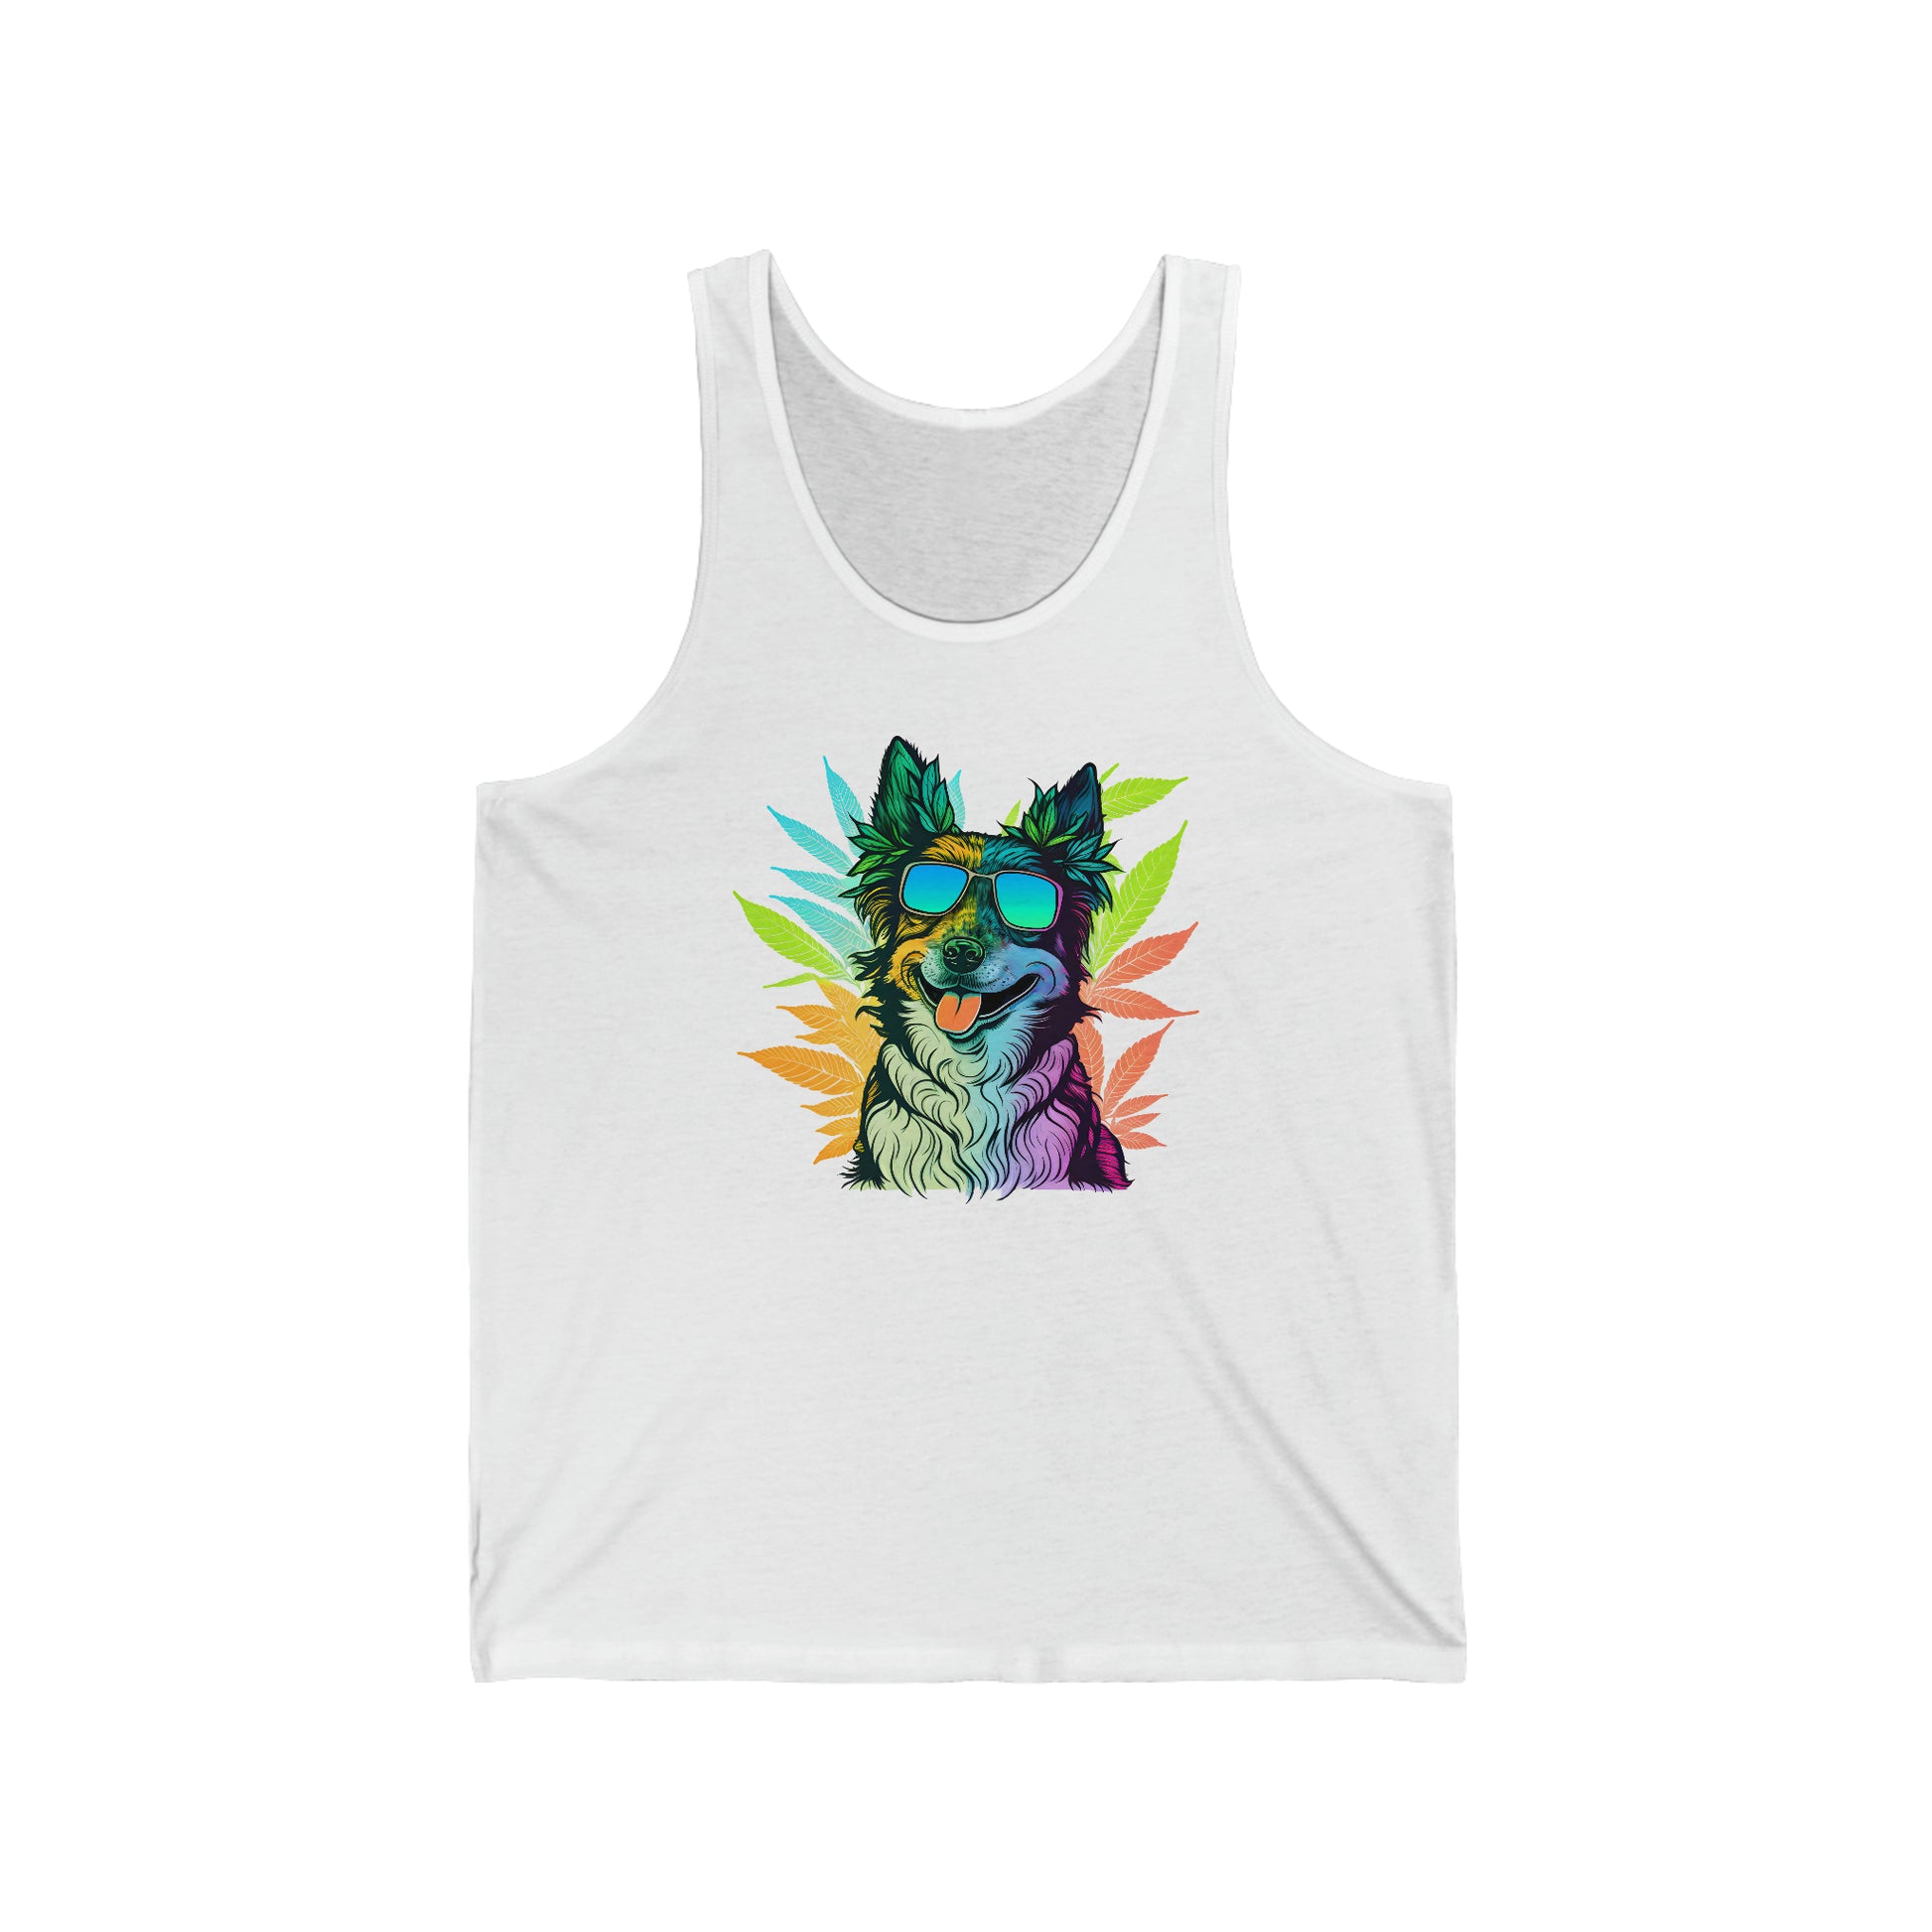 A white cannabis tank top featuring a border collie wearing shades and surrounded by marijuana leaves